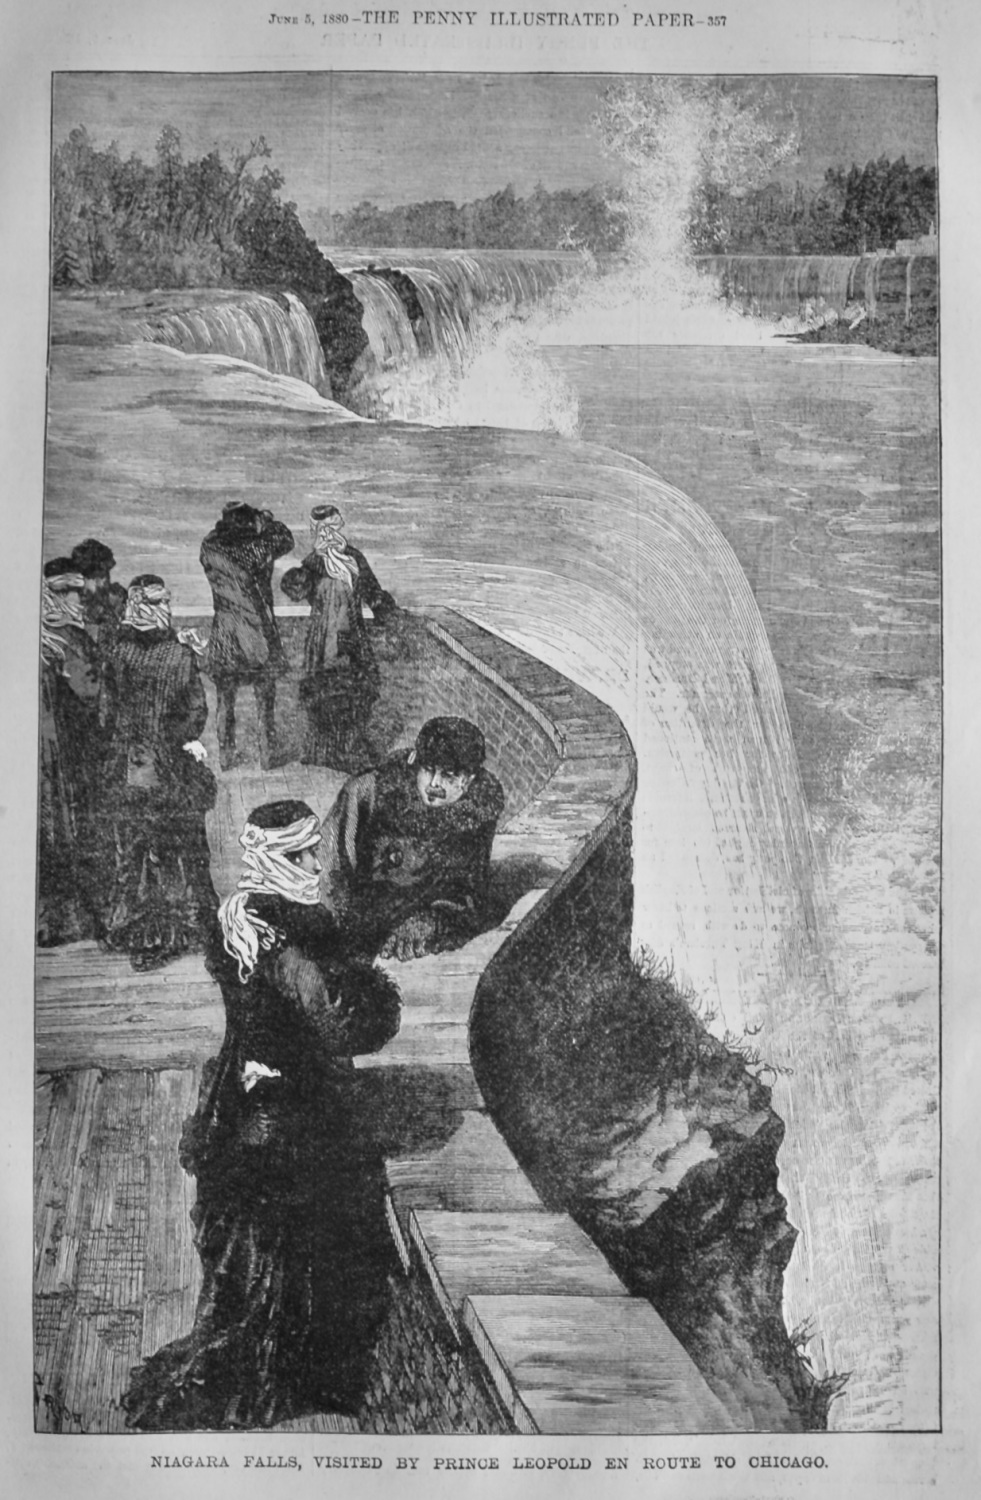 Niagara Falls, Visited by Prince Leopold en Route to Chicago. 1880.